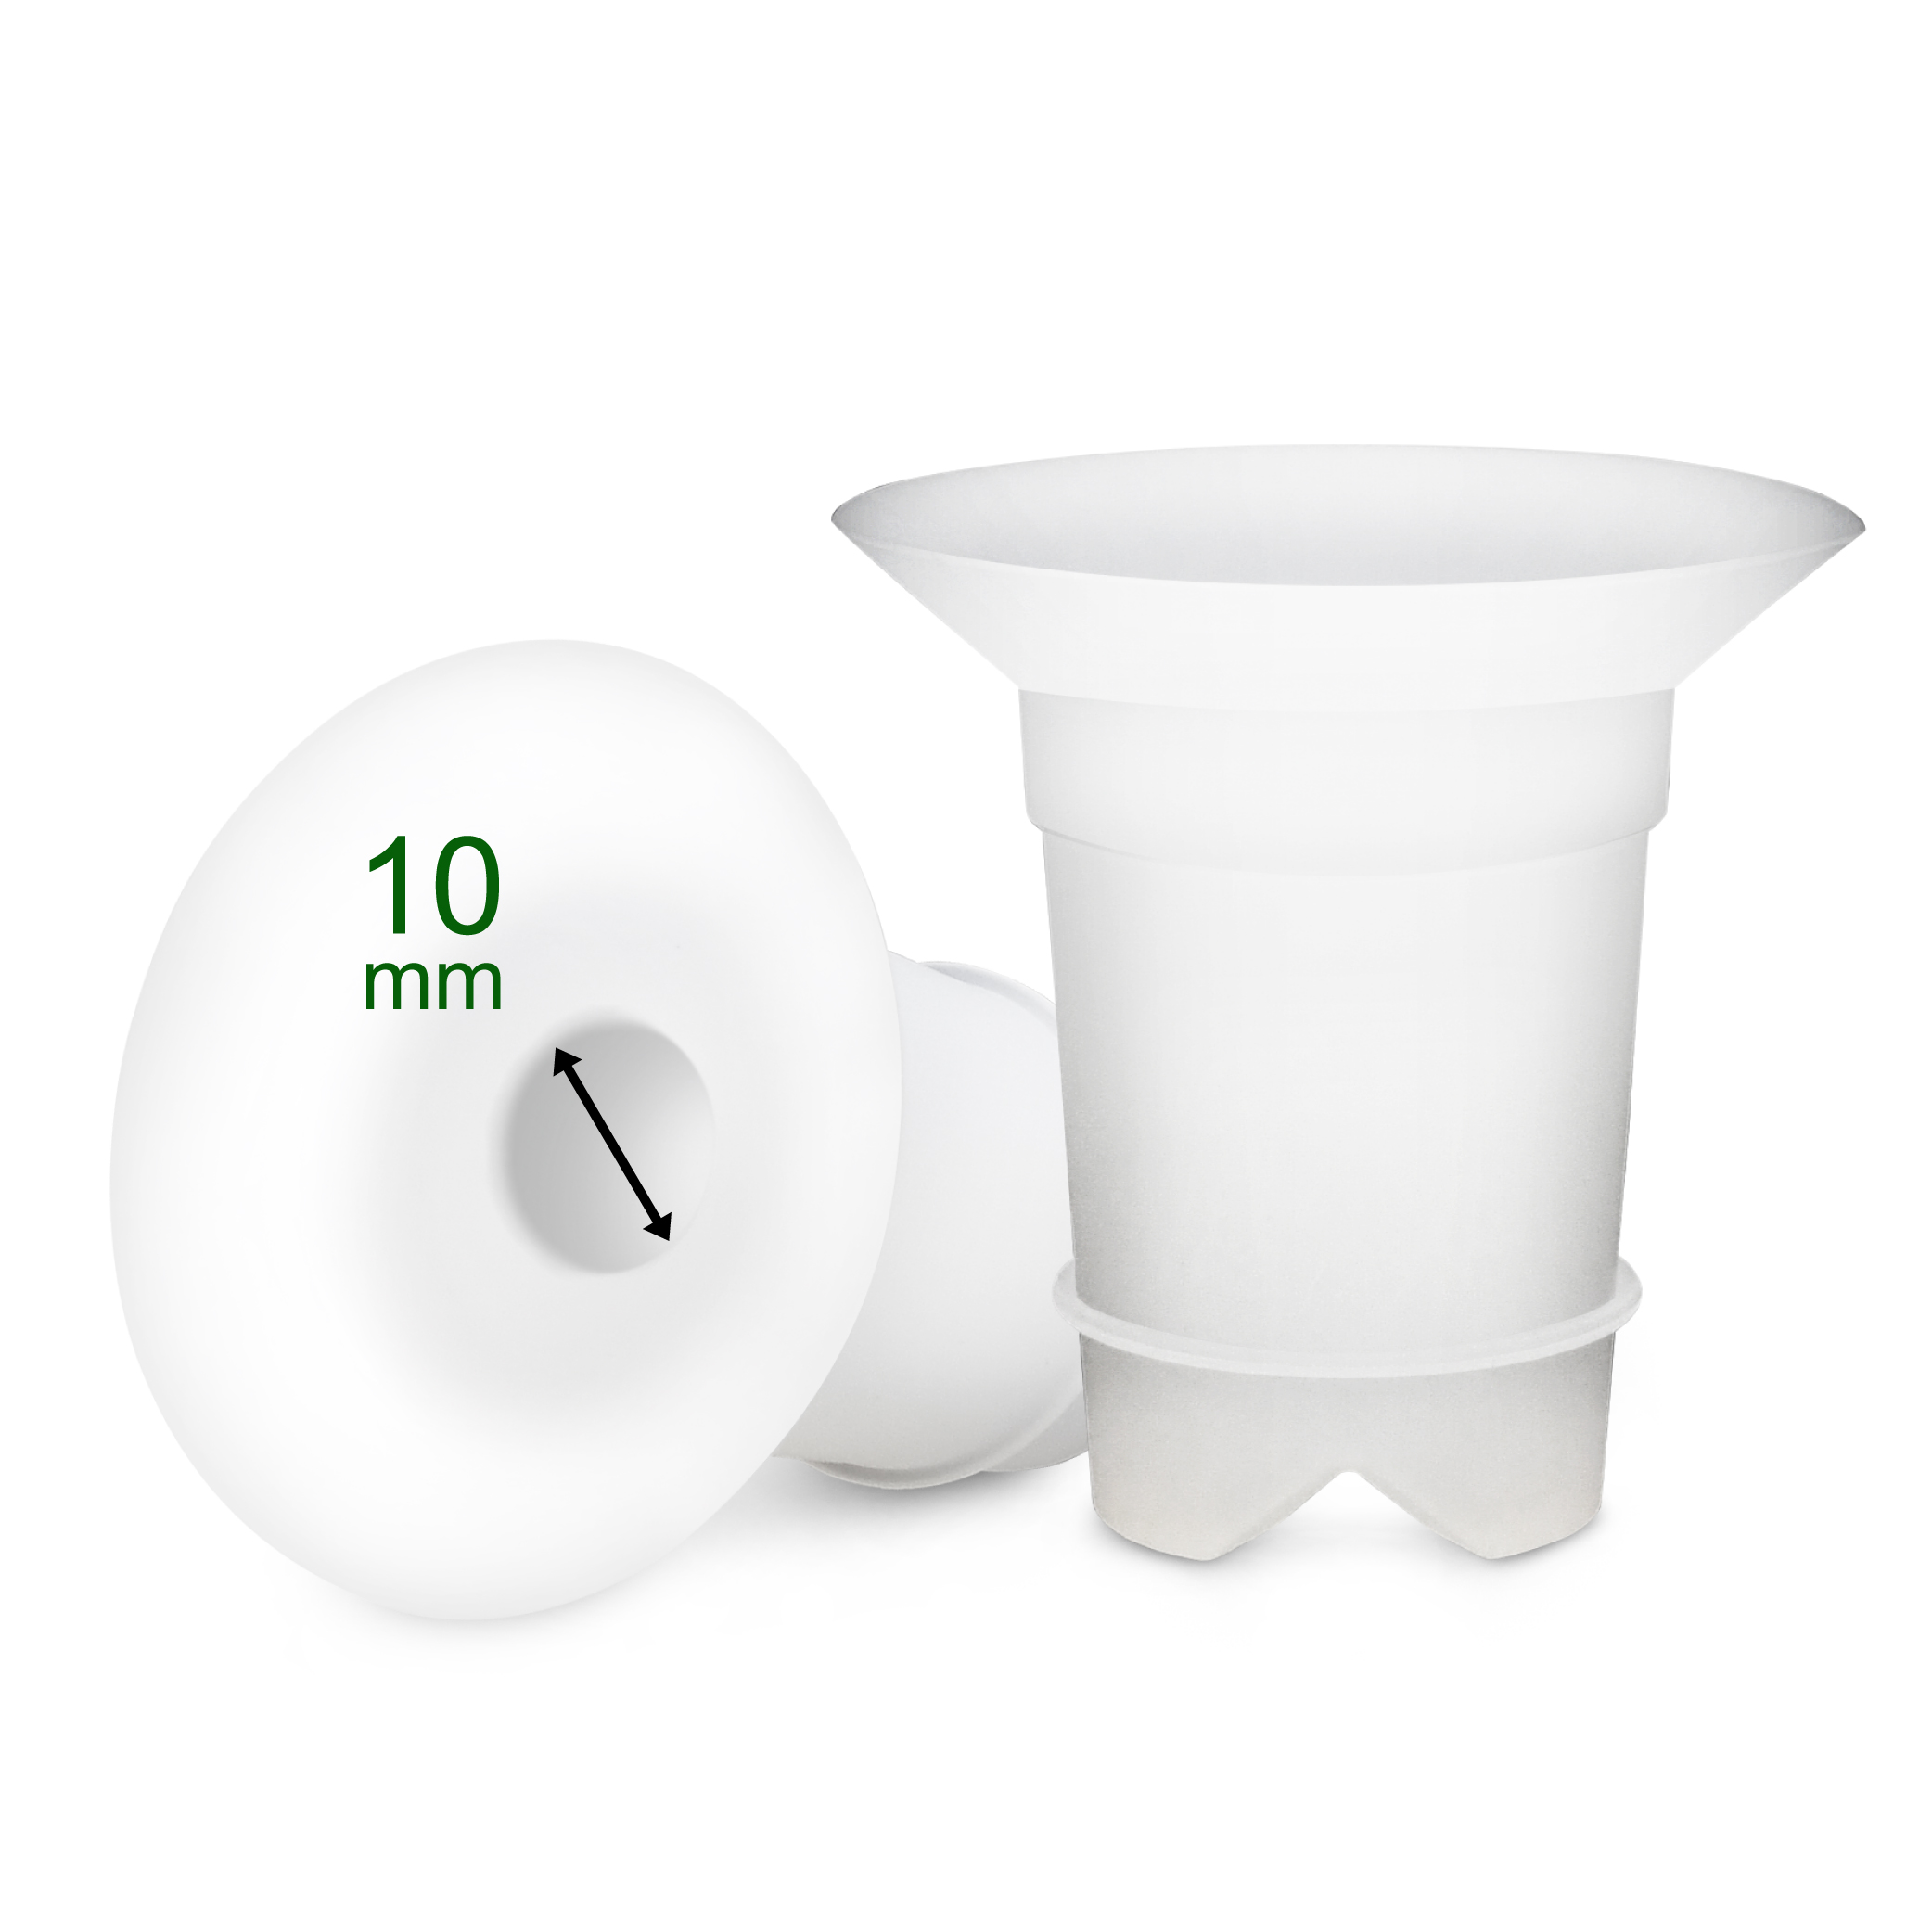 Maymom Flange Inserts 10 mm Compatible with Freemie 25 mm Collection Cup. 2pc/Each